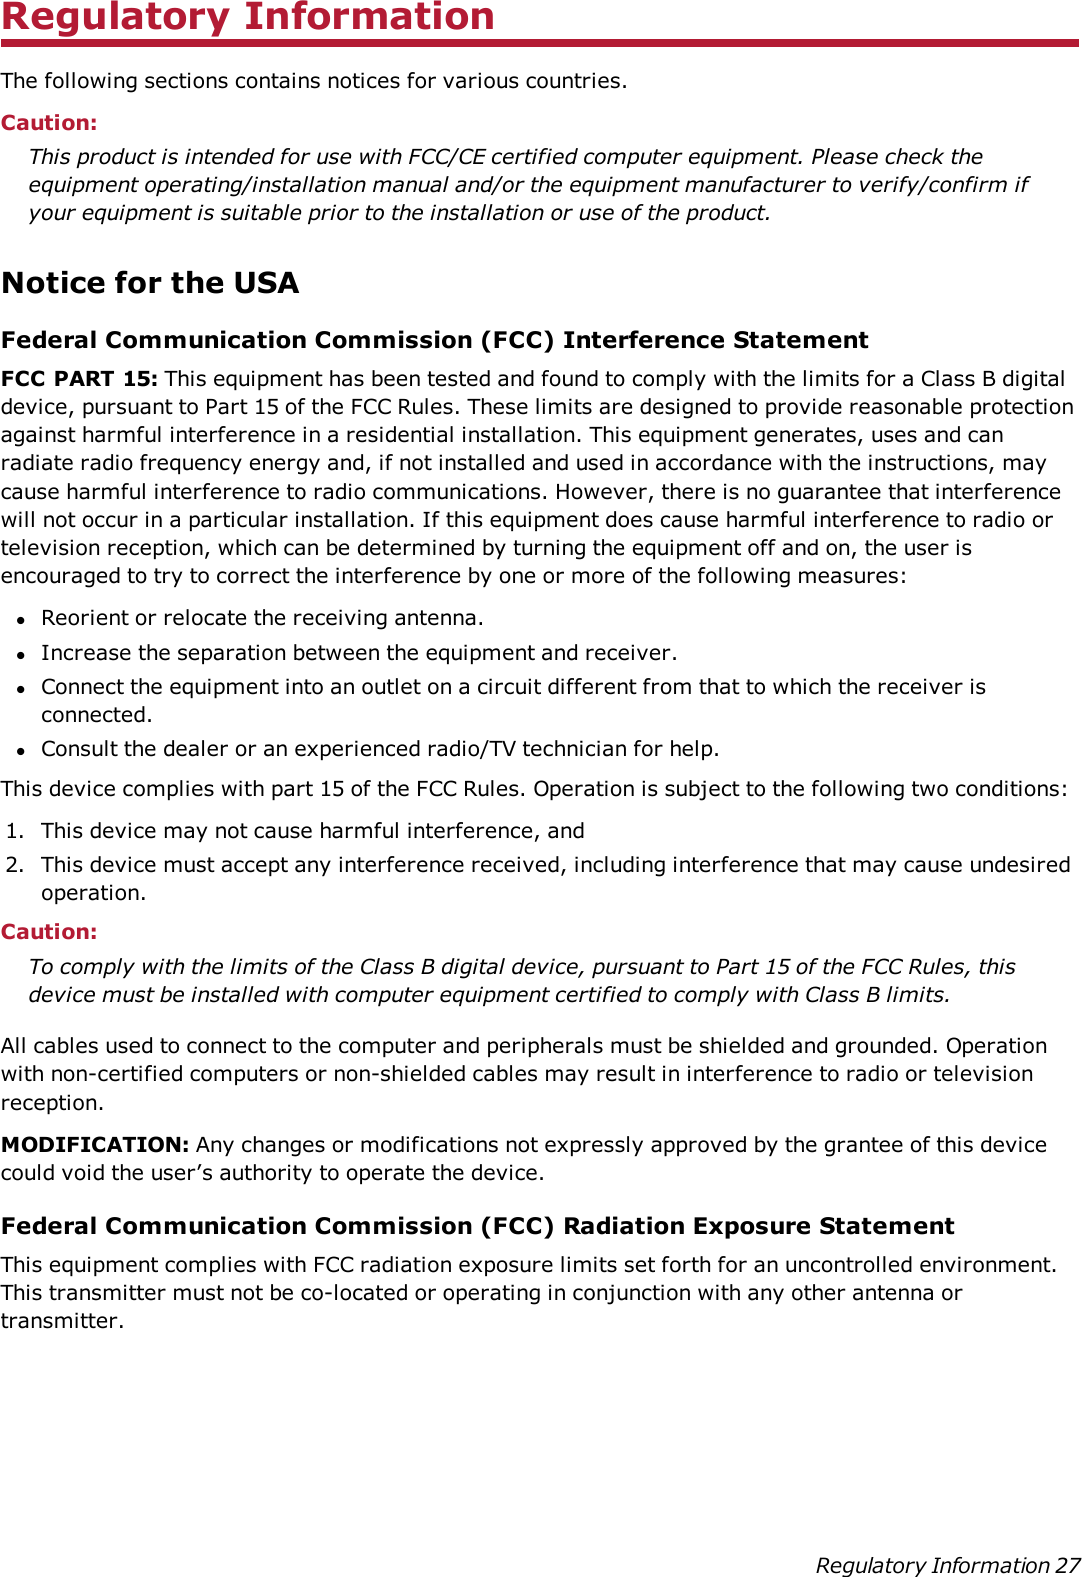 Regulatory InformationThe following sections contains notices for various countries.Caution:This product is intended for use with FCC/CE certified computer equipment. Please check theequipment operating/installation manual and/or the equipment manufacturer to verify/confirm ifyour equipment is suitable prior to the installation or use of the product.Notice for the USAFederal Communication Commission (FCC) Interference StatementFCC PART 15: This equipment has been tested and found to comply with the limits for a Class B digitaldevice, pursuant to Part 15 of the FCC Rules. These limits are designed to provide reasonable protectionagainst harmful interference in a residential installation. This equipment generates, uses and canradiate radio frequency energy and, if not installed and used in accordance with the instructions, maycause harmful interference to radio communications. However, there is no guarantee that interferencewill not occur in a particular installation. If this equipment does cause harmful interference to radio ortelevision reception, which can be determined by turning the equipment off and on, the user isencouraged to try to correct the interference by one or more of the following measures:lReorient or relocate the receiving antenna.lIncrease the separation between the equipment and receiver.lConnect the equipment into an outlet on a circuit different from that to which the receiver isconnected.lConsult the dealer or an experienced radio/TV technician for help.This device complies with part 15 of the FCC Rules. Operation is subject to the following two conditions:1. This device may not cause harmful interference, and2. This device must accept any interference received, including interference that may cause undesiredoperation.Caution:To comply with the limits of the Class B digital device, pursuant to Part 15 of the FCC Rules, thisdevice must be installed with computer equipment certified to comply with Class B limits.All cables used to connect to the computer and peripherals must be shielded and grounded. Operationwith non-certified computers or non-shielded cables may result in interference to radio or televisionreception.MODIFICATION: Any changes or modifications not expressly approved by the grantee of this devicecould void the user’s authority to operate the device.Federal Communication Commission (FCC) Radiation Exposure StatementThis equipment complies with FCC radiation exposure limits set forth for an uncontrolled environment.This transmitter must not be co-located or operating in conjunction with any other antenna ortransmitter.Regulatory Information 27